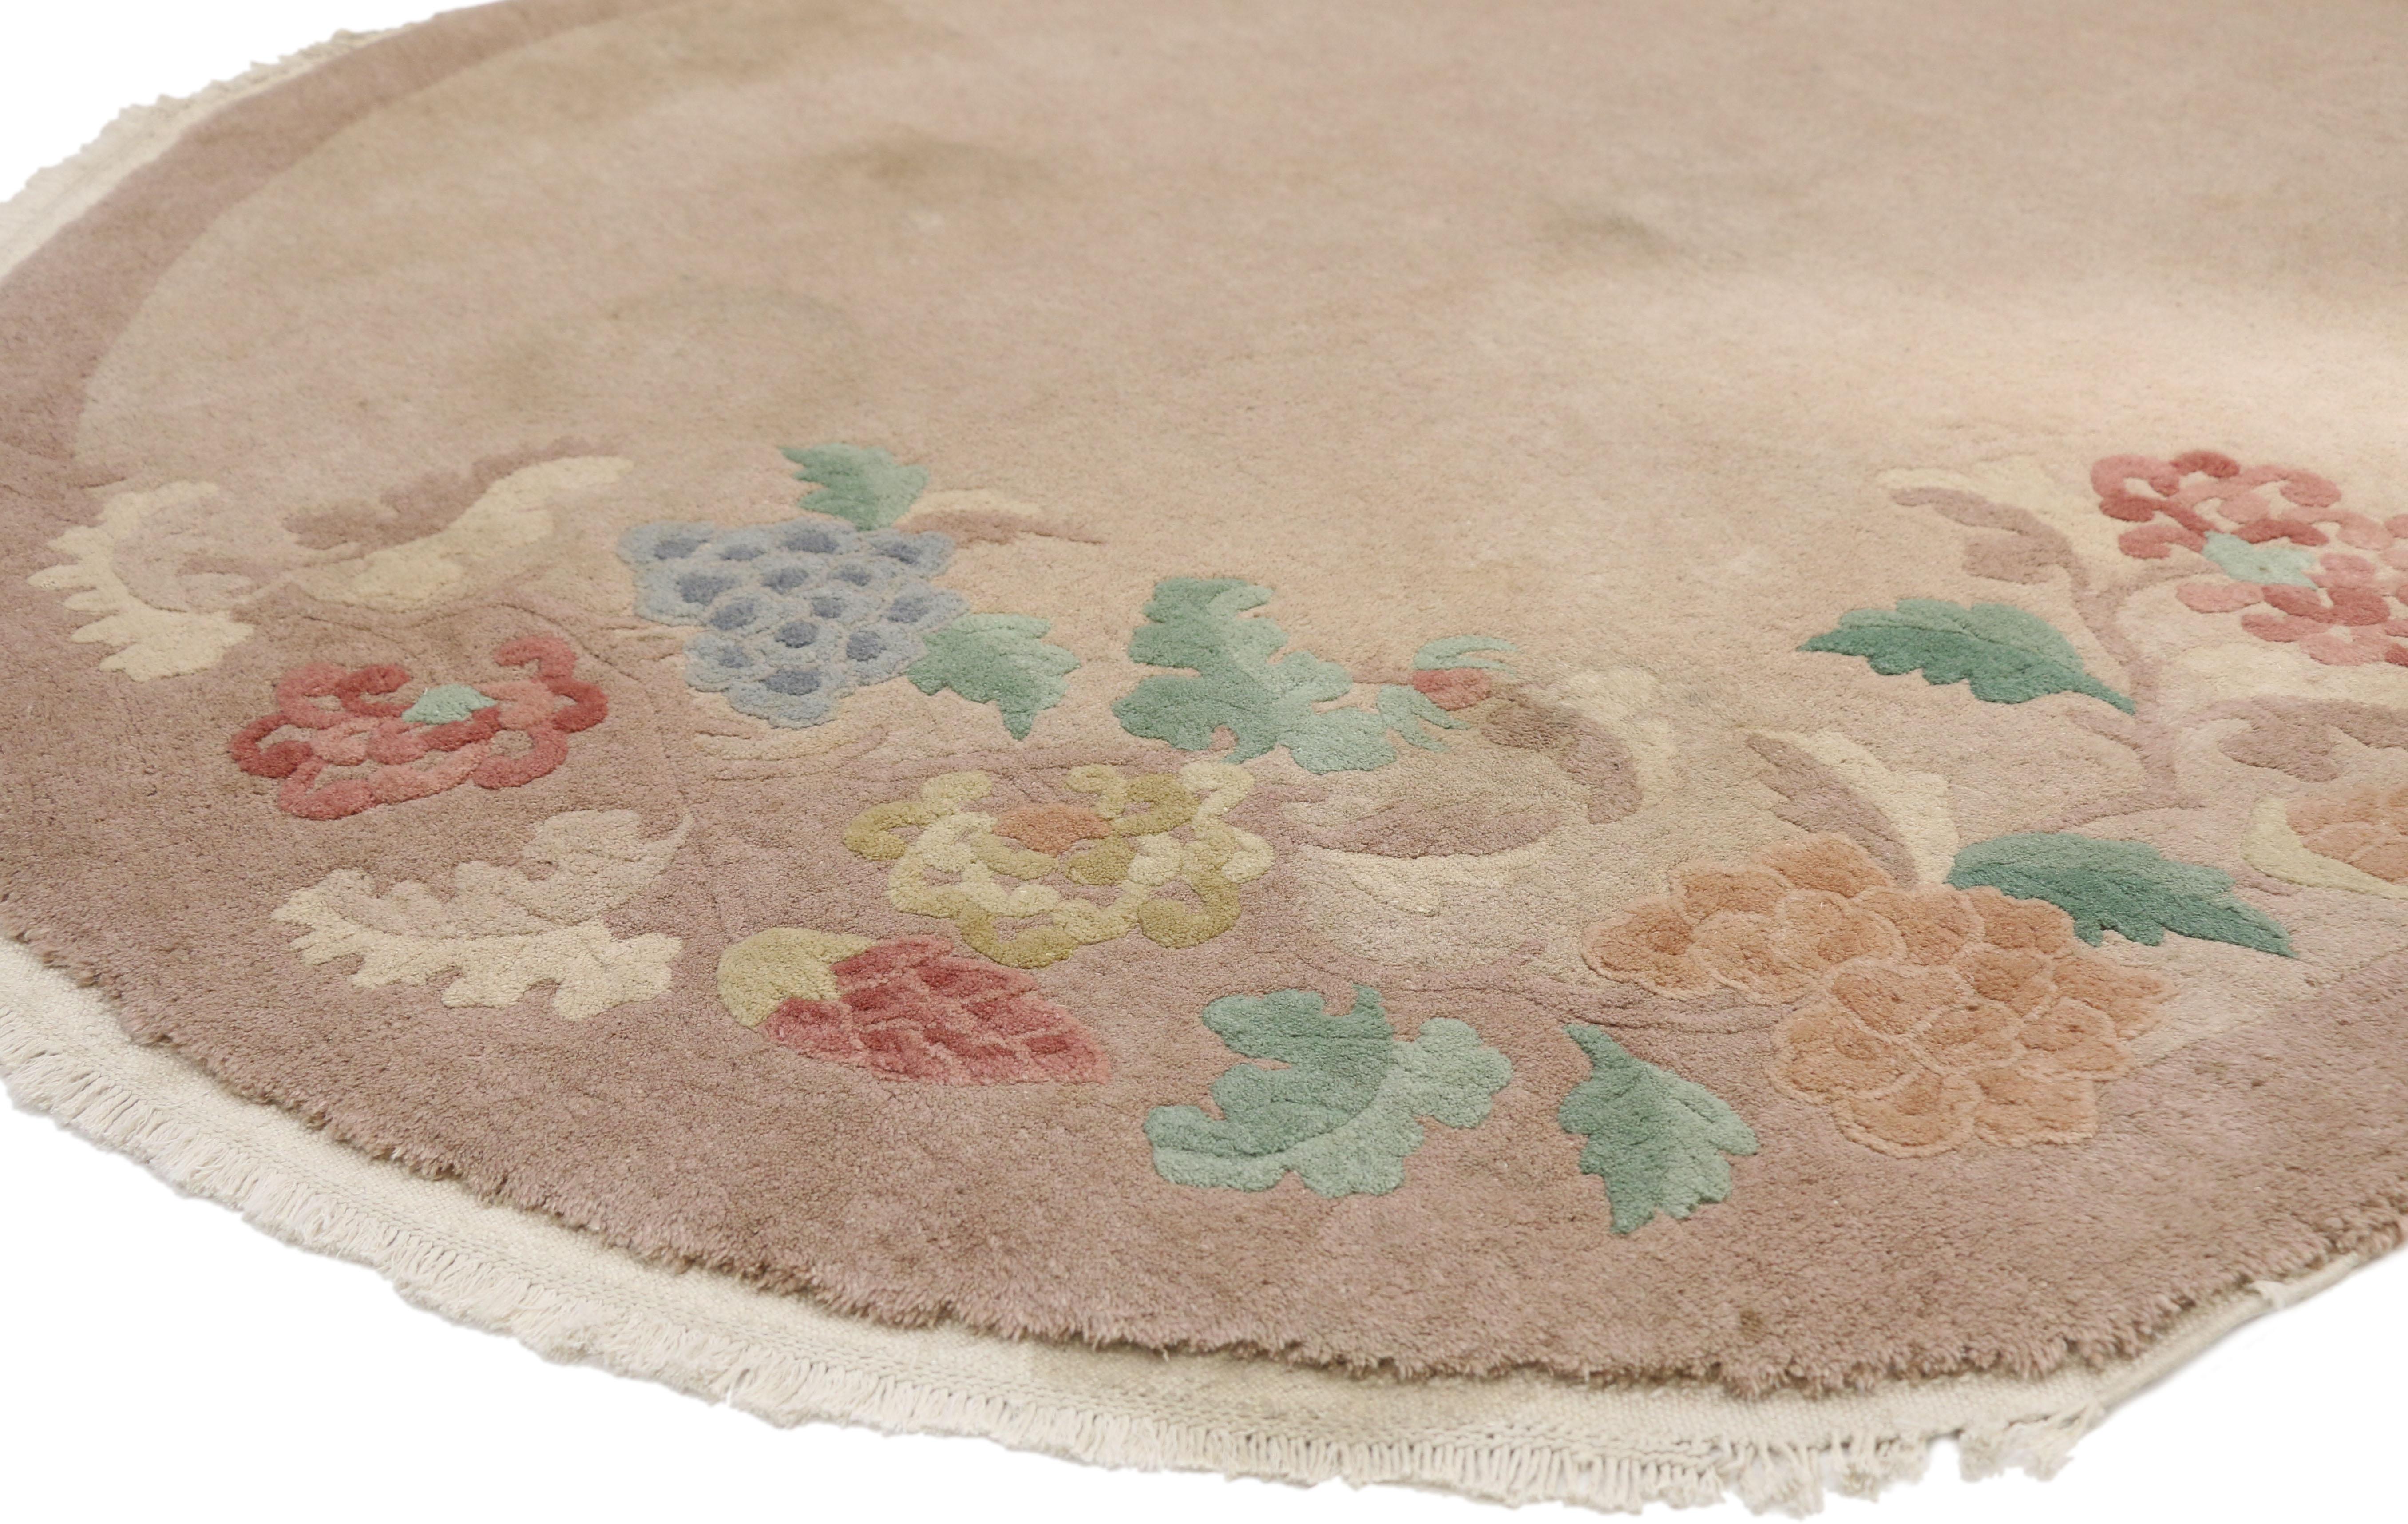 77328 antique Chinese Art Deco oval rug with traditional chinoiserie style. This hand knotted wool antique Chinese Art Deco rug features a plain neutral field and border festooned with three scrolling floral vines along the edges of the composition.